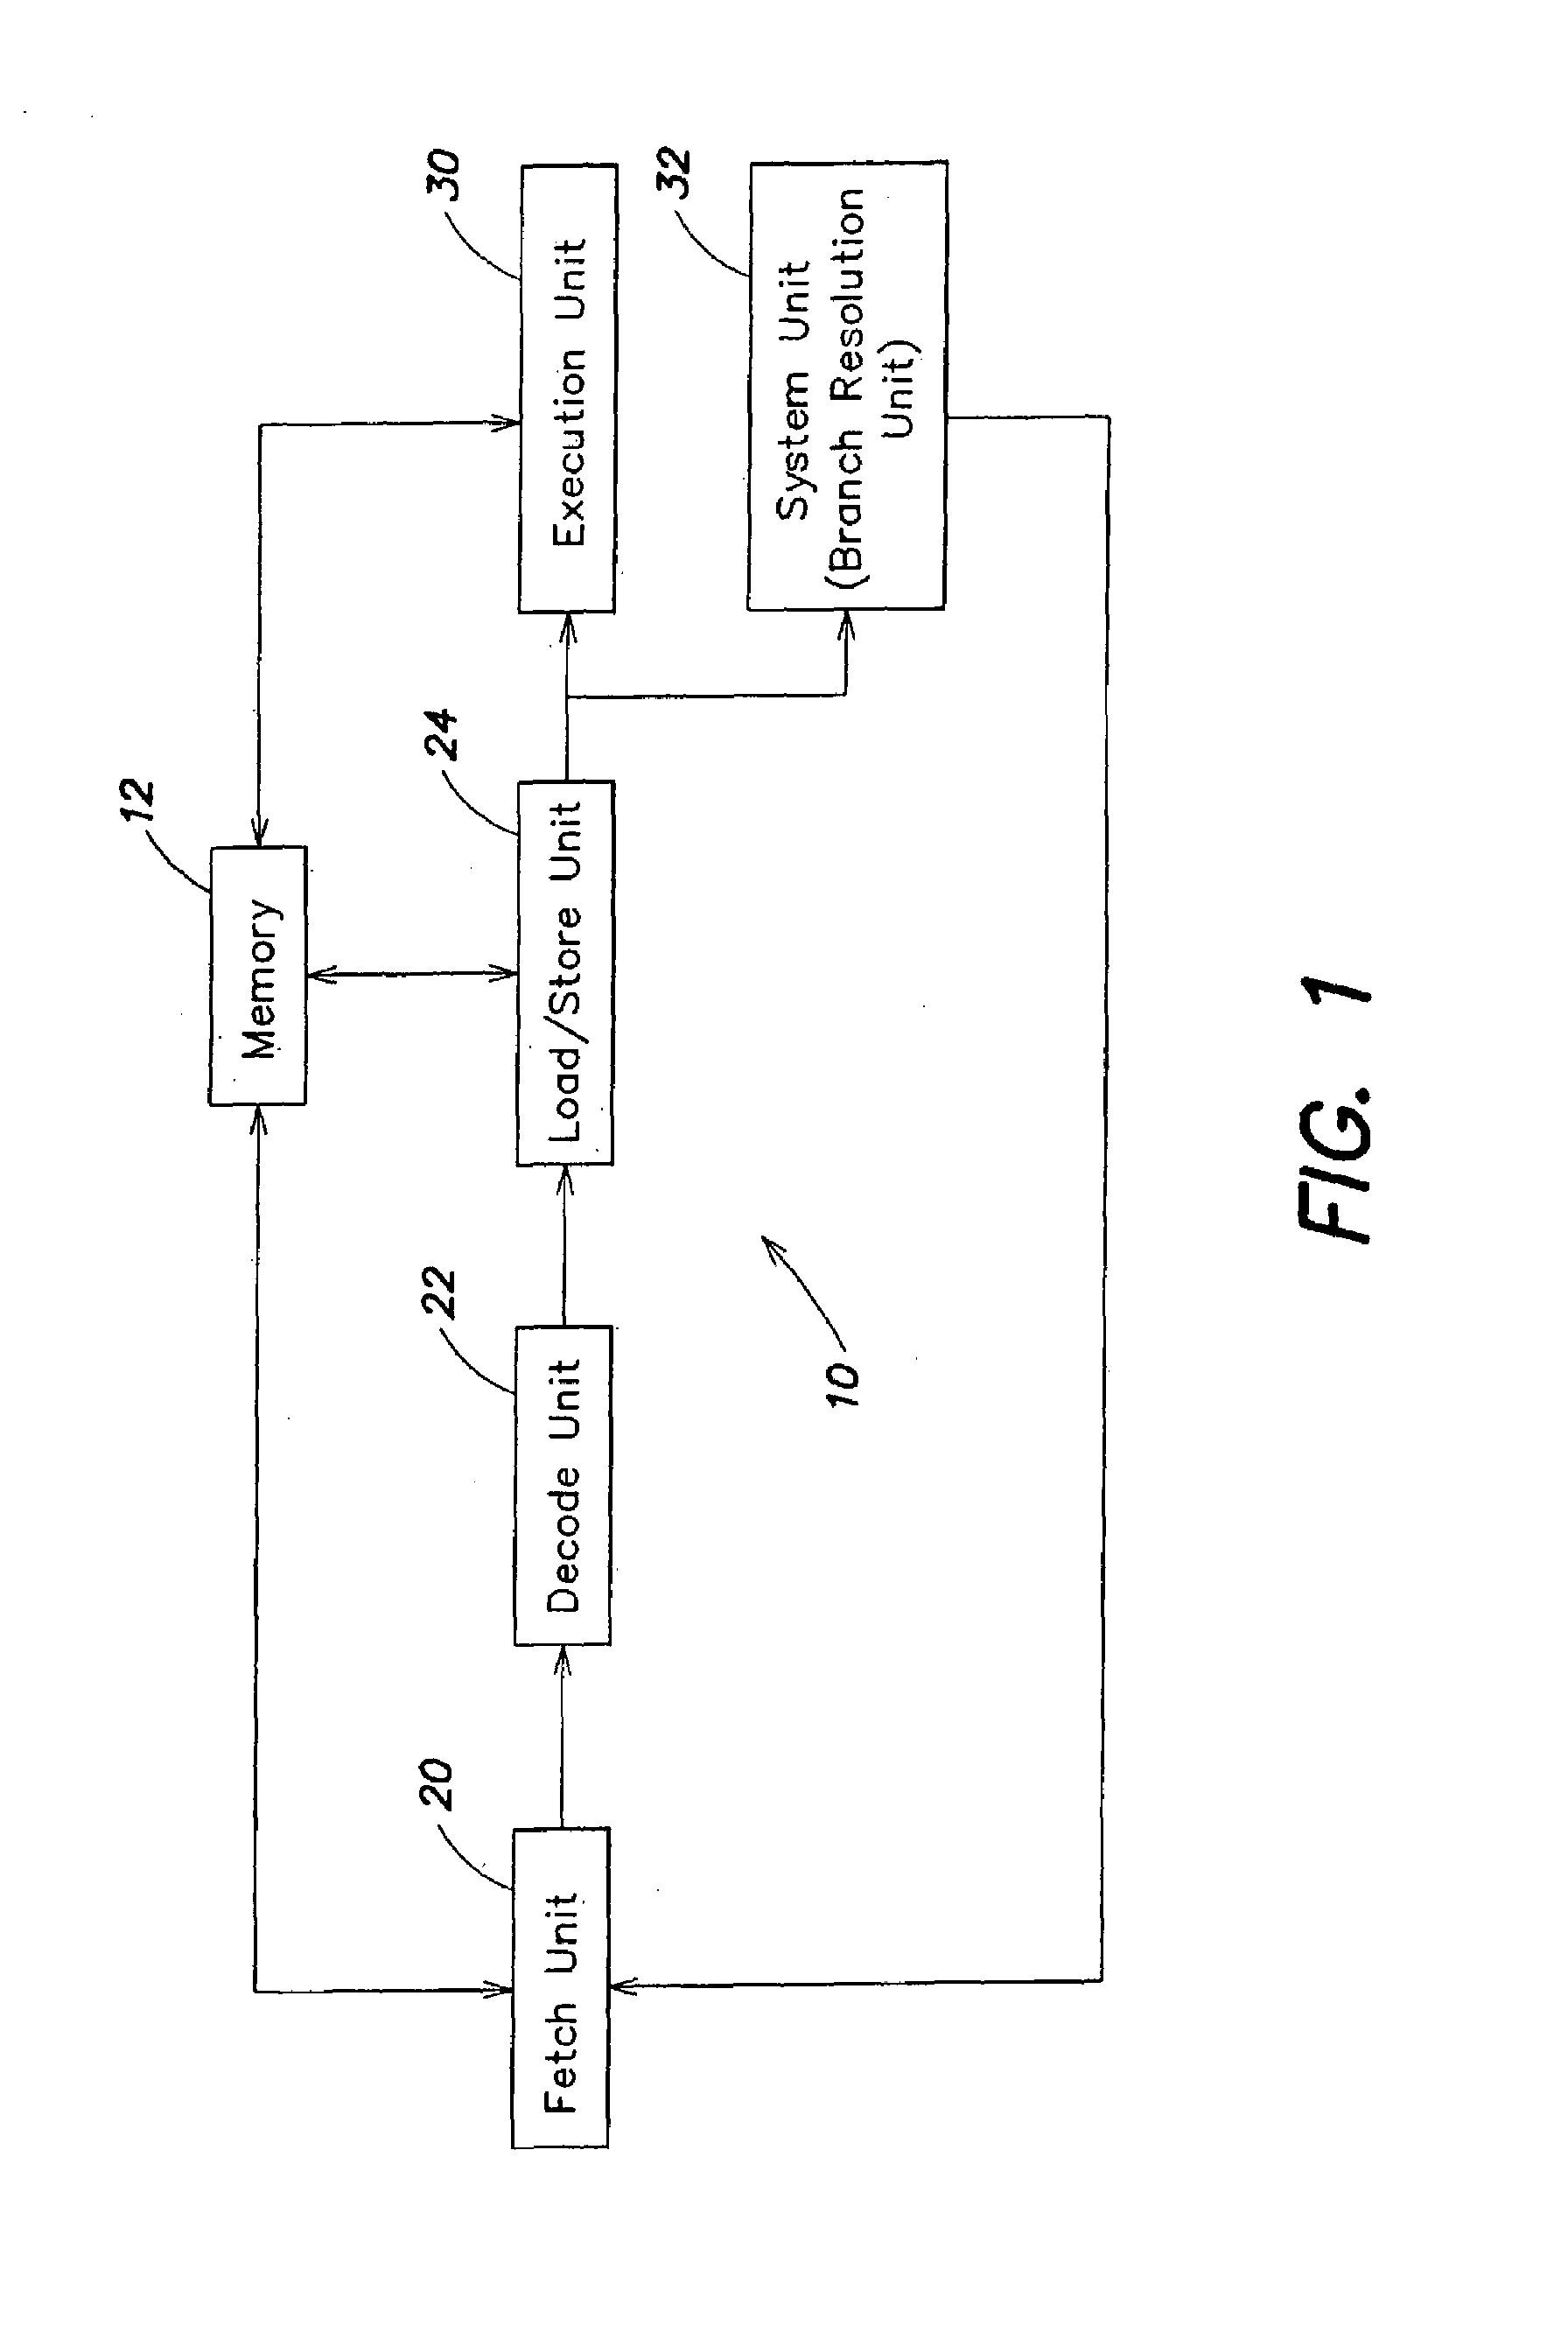 Method and apparatus for branch prediction based on branch targets utilizing tag and data arrays